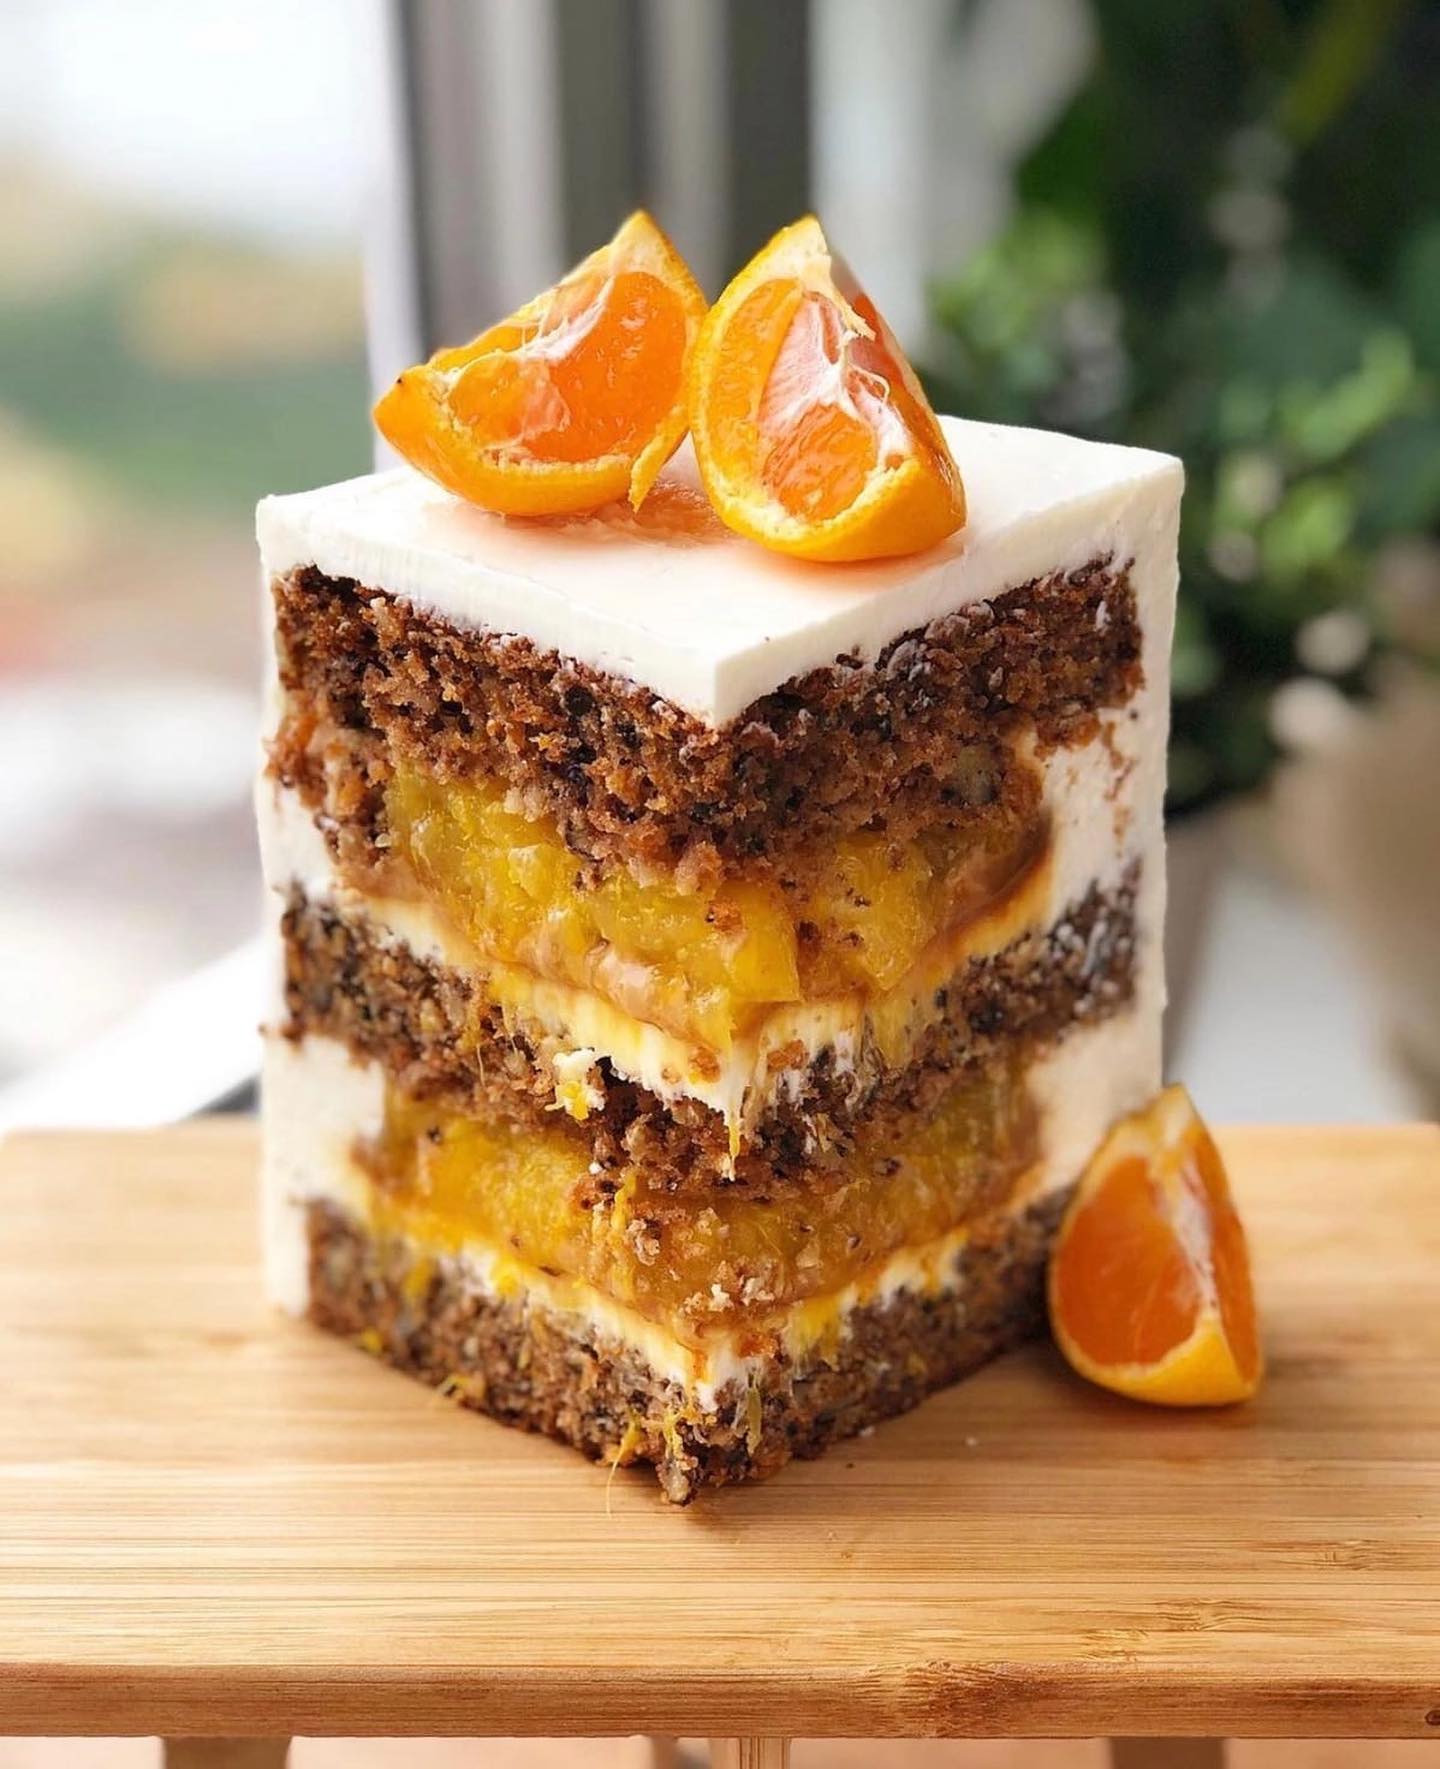 Piquant carrot cake with oranges